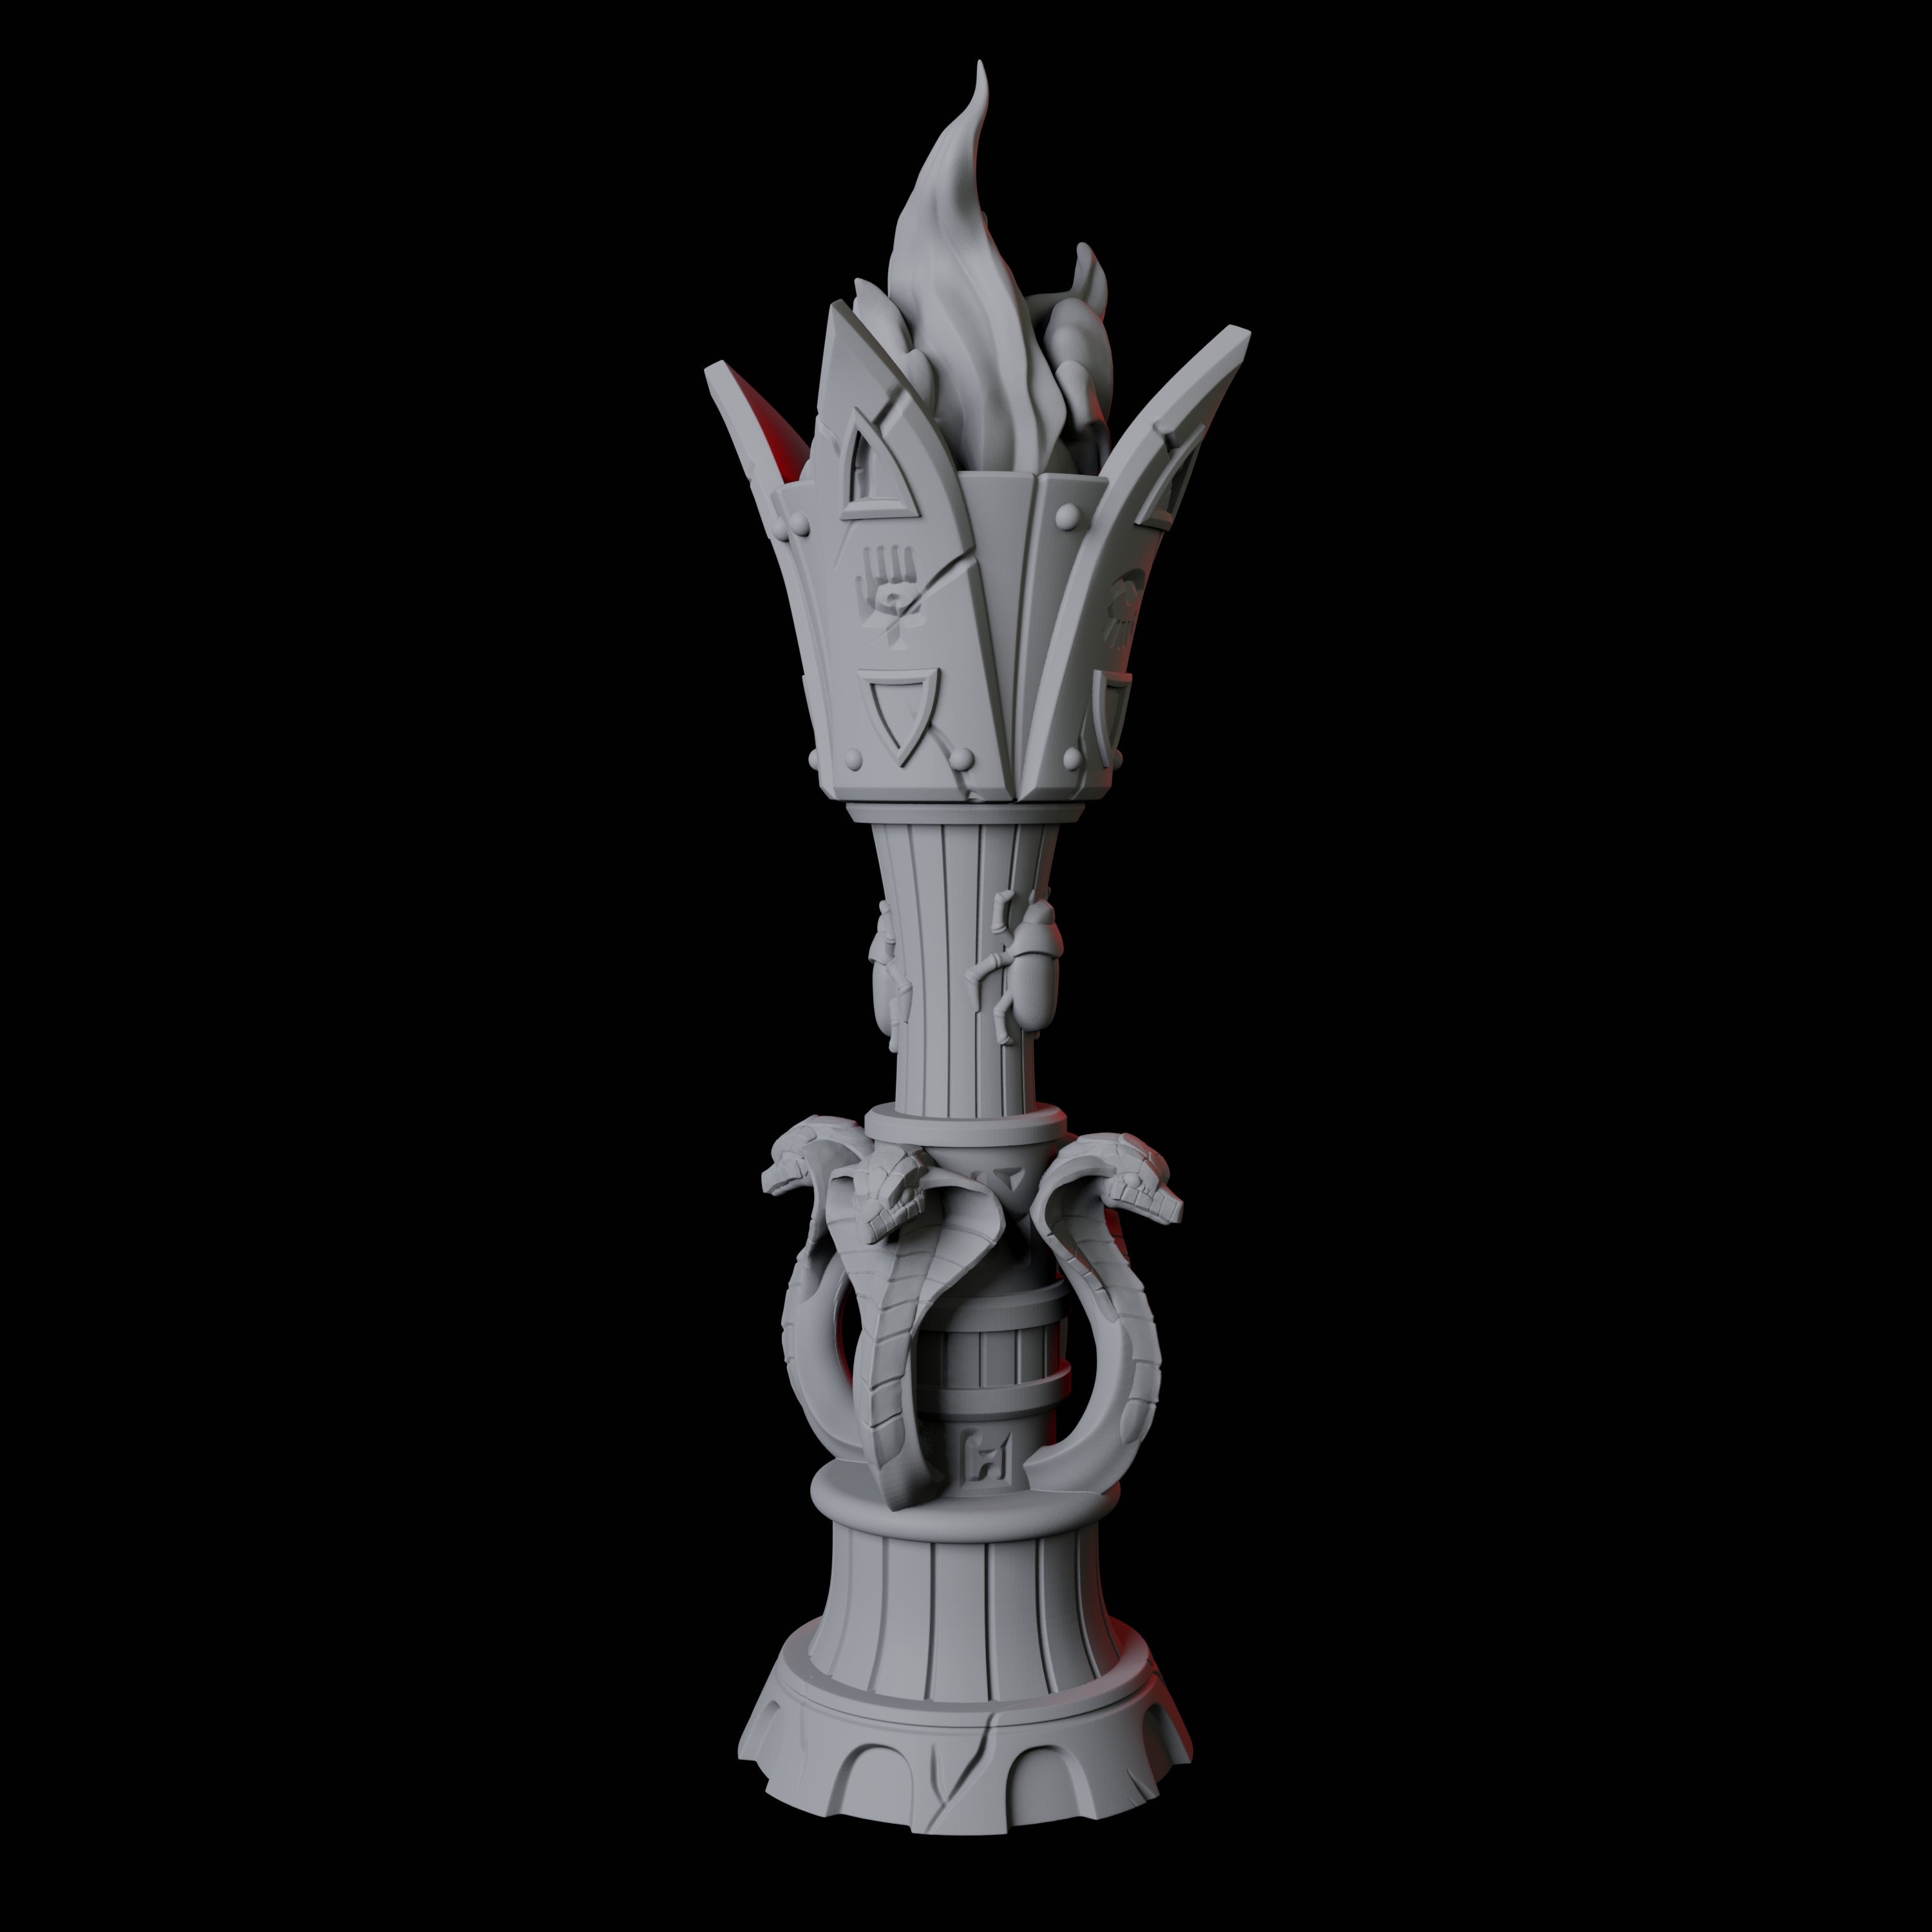 Ancient Egyptian Torch Miniature for Dungeons and Dragons, Pathfinder or other TTRPGs